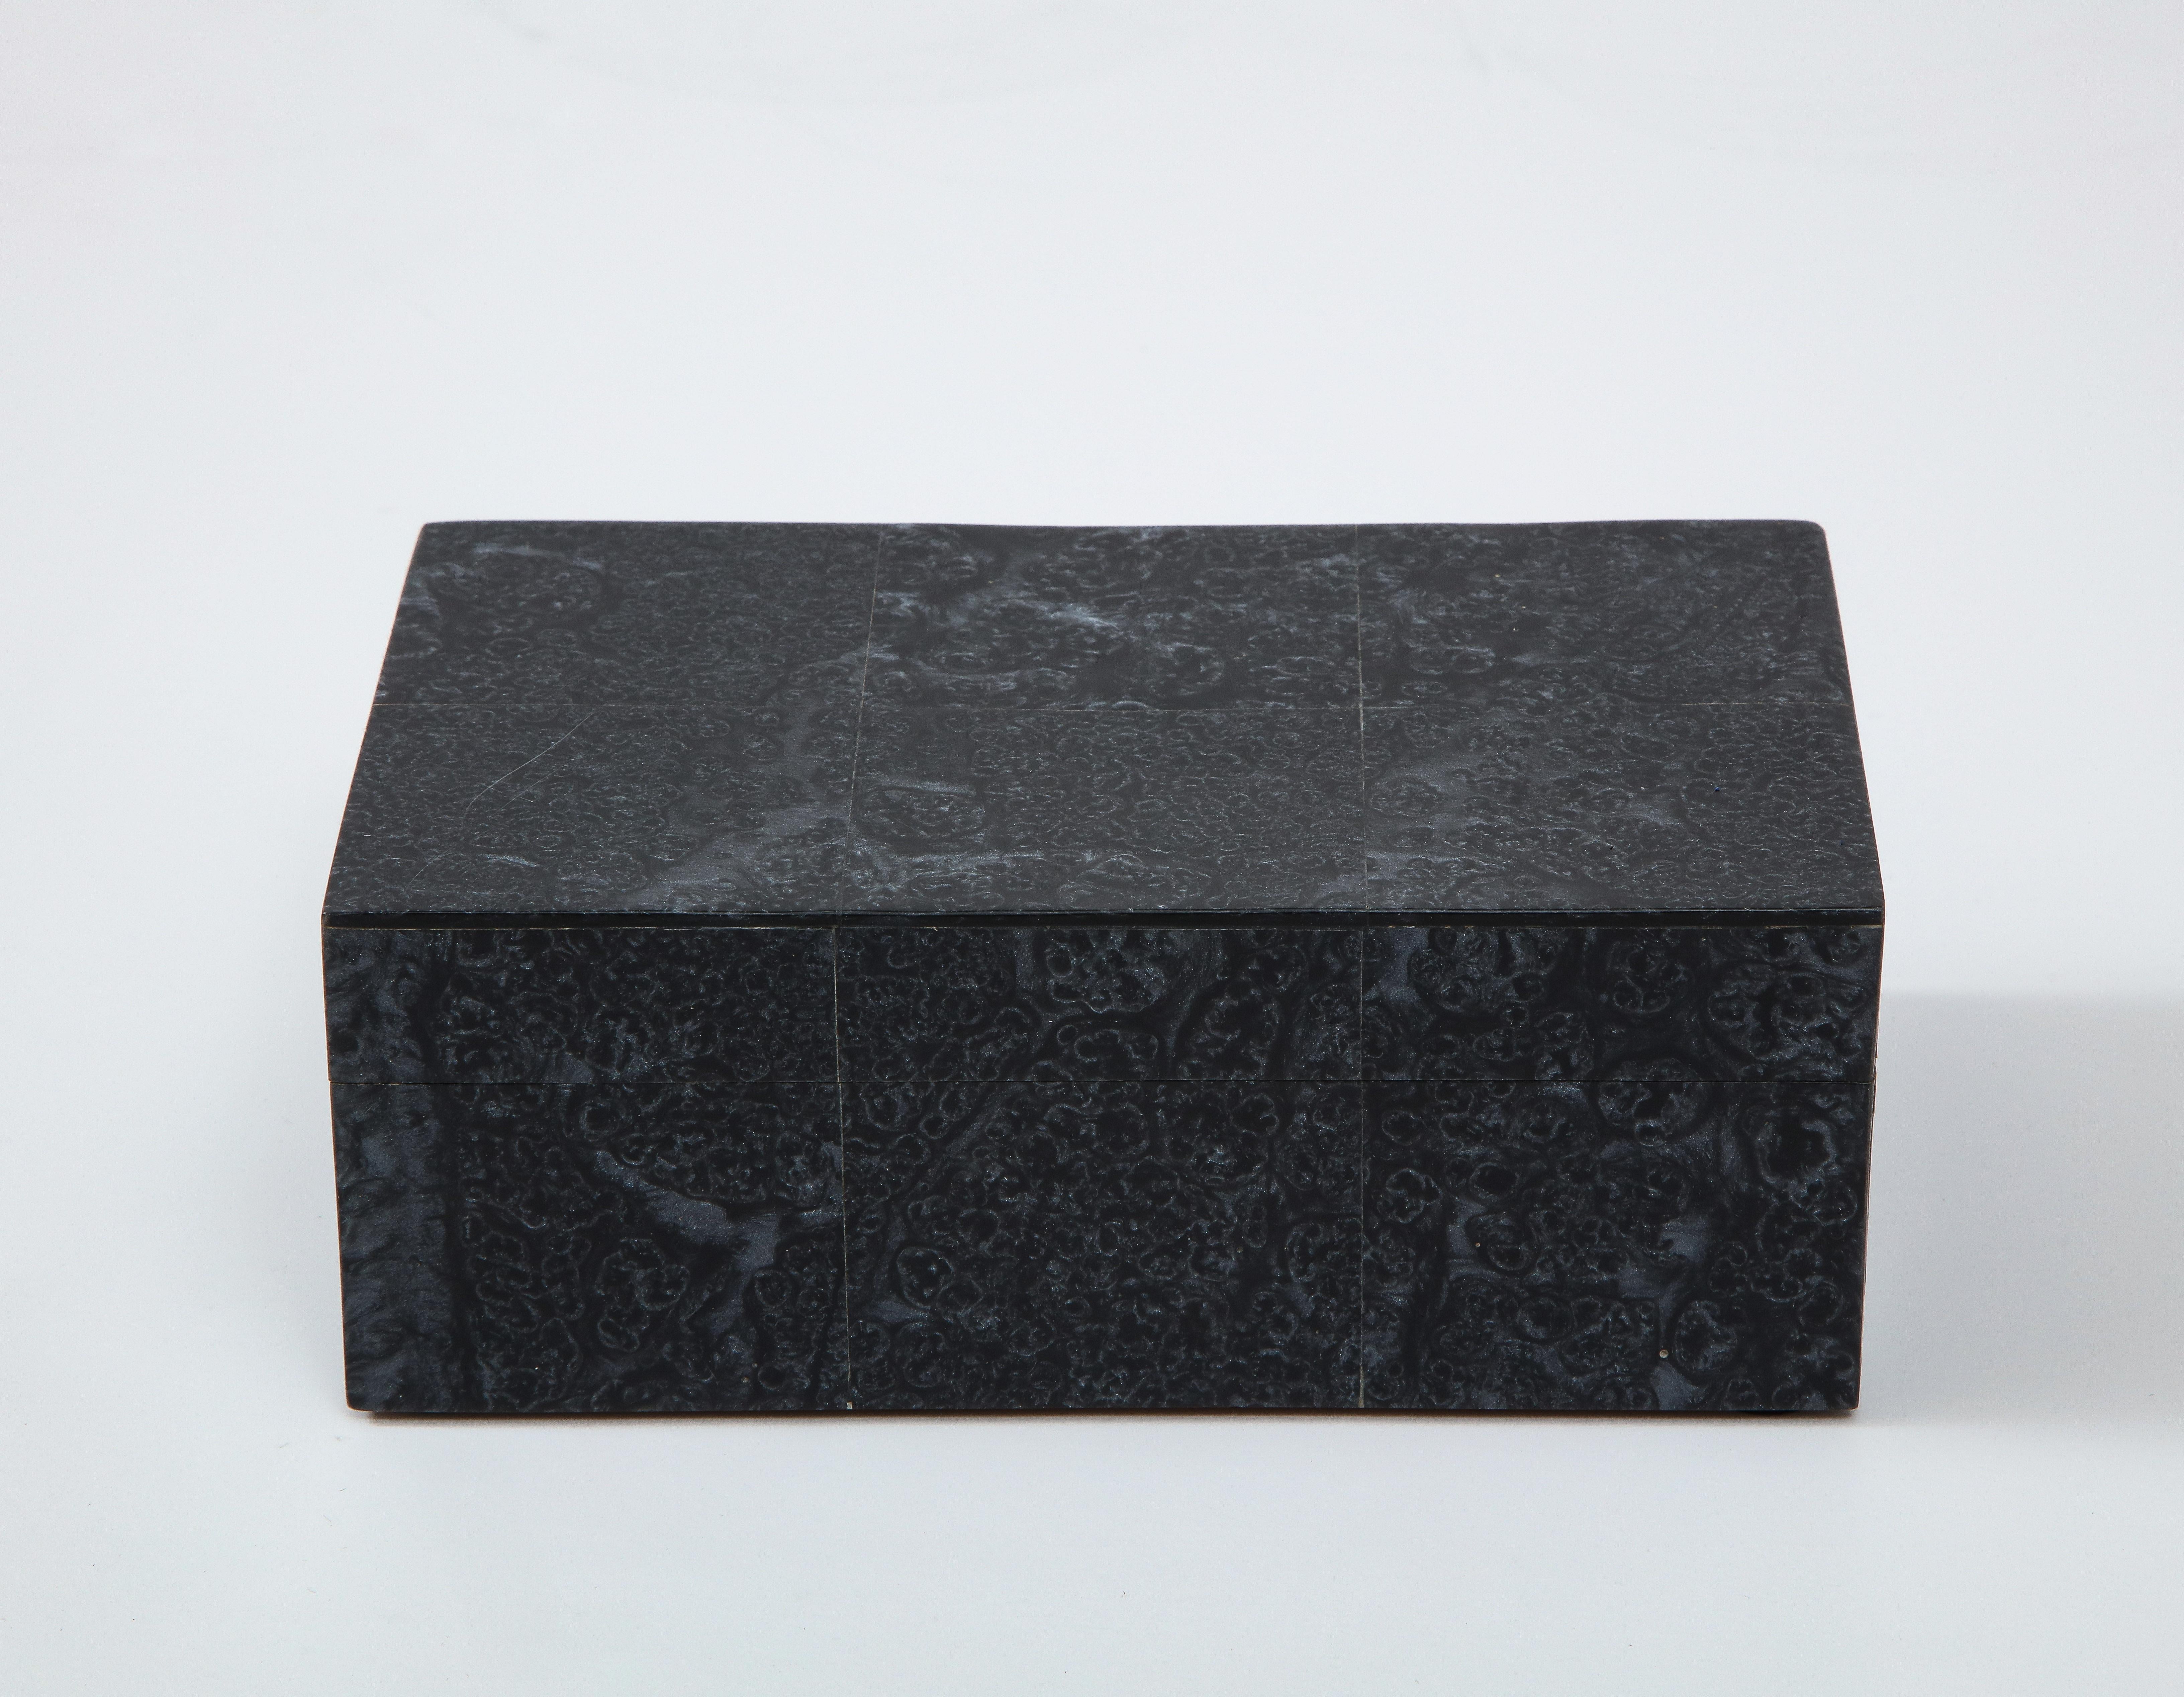 Decorative keepsake box clad in obsidian stone, lined in wood. A great addition to any desk or dresser.